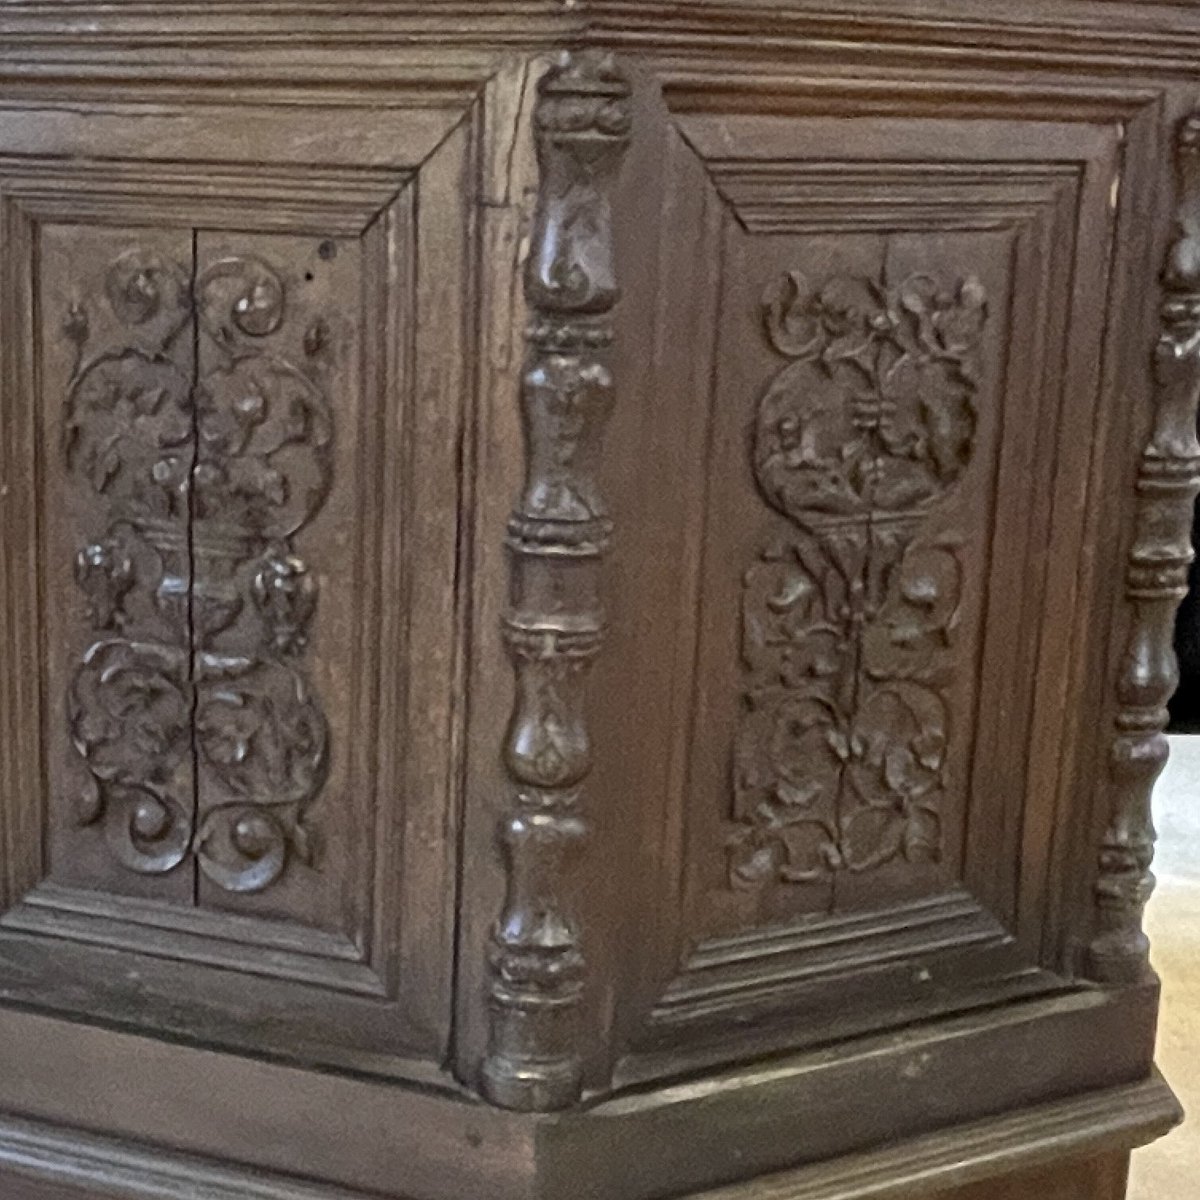 Historic England describes the pulpit at St Mary le Crypt, Gloucester as ‘early to mid C16 pulpit carved with renaissance ornament’ #woodensday #woodcarving